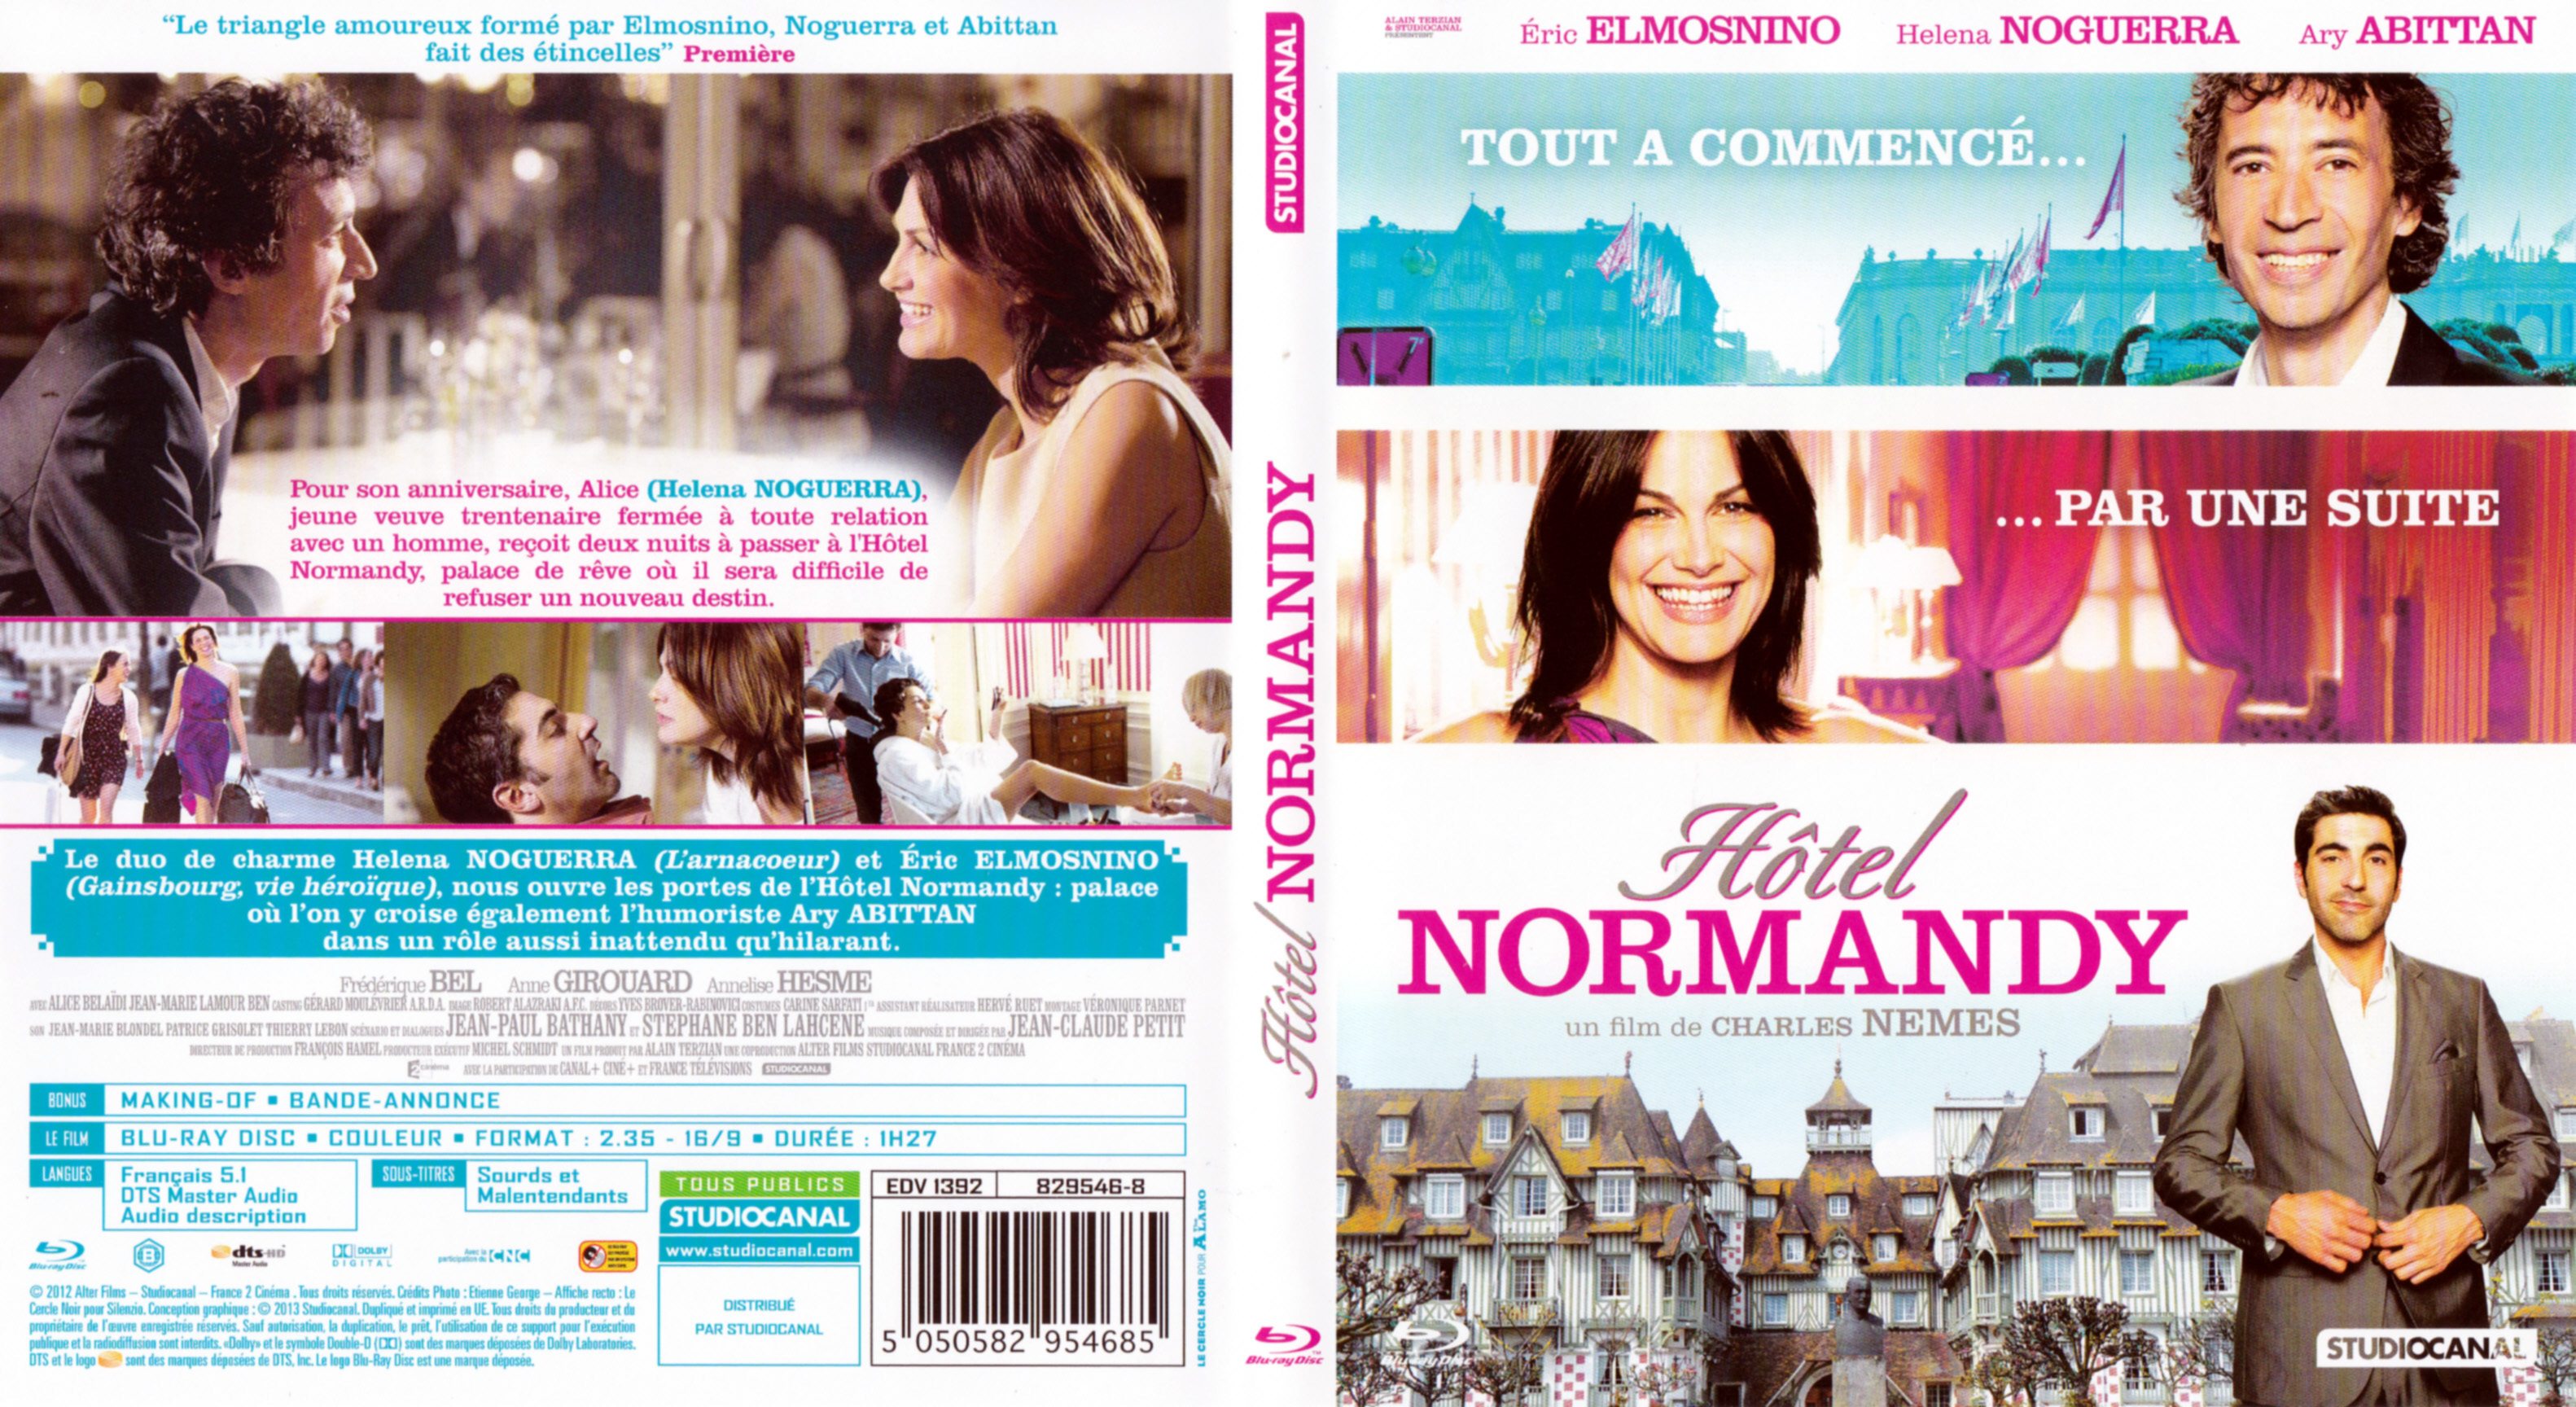 Jaquette DVD Hotel Normandy (BLU-RAY)